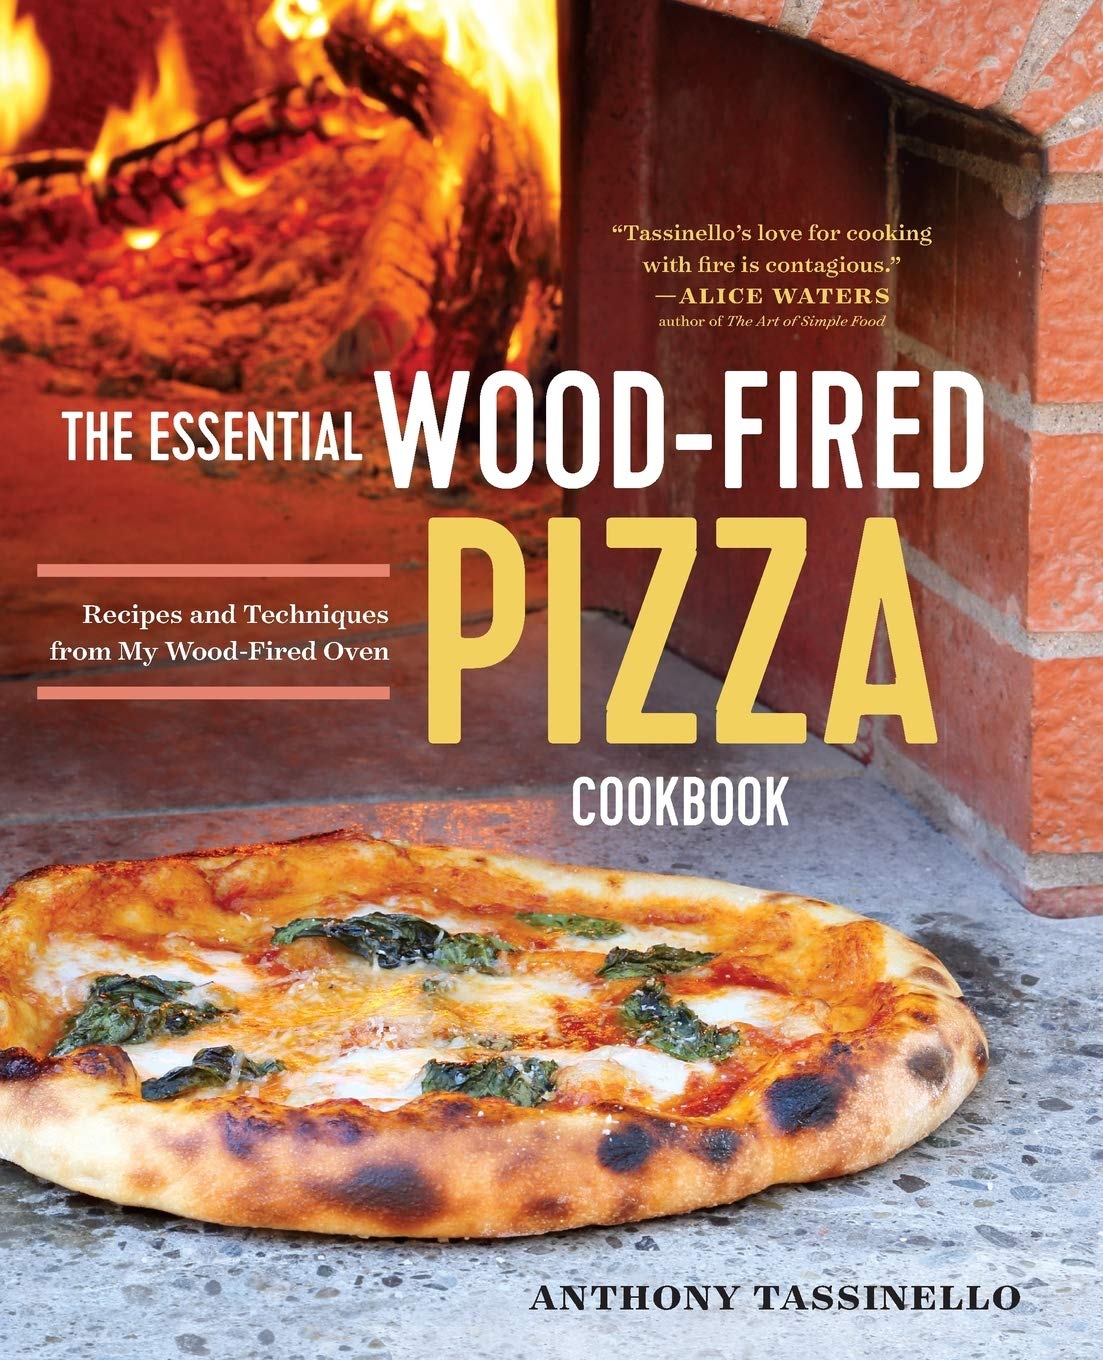 The Essential Wood Fired Pizza Cookbook: Recipes and Techniques From My Wood Fired Oven (Anthony Tassinello)